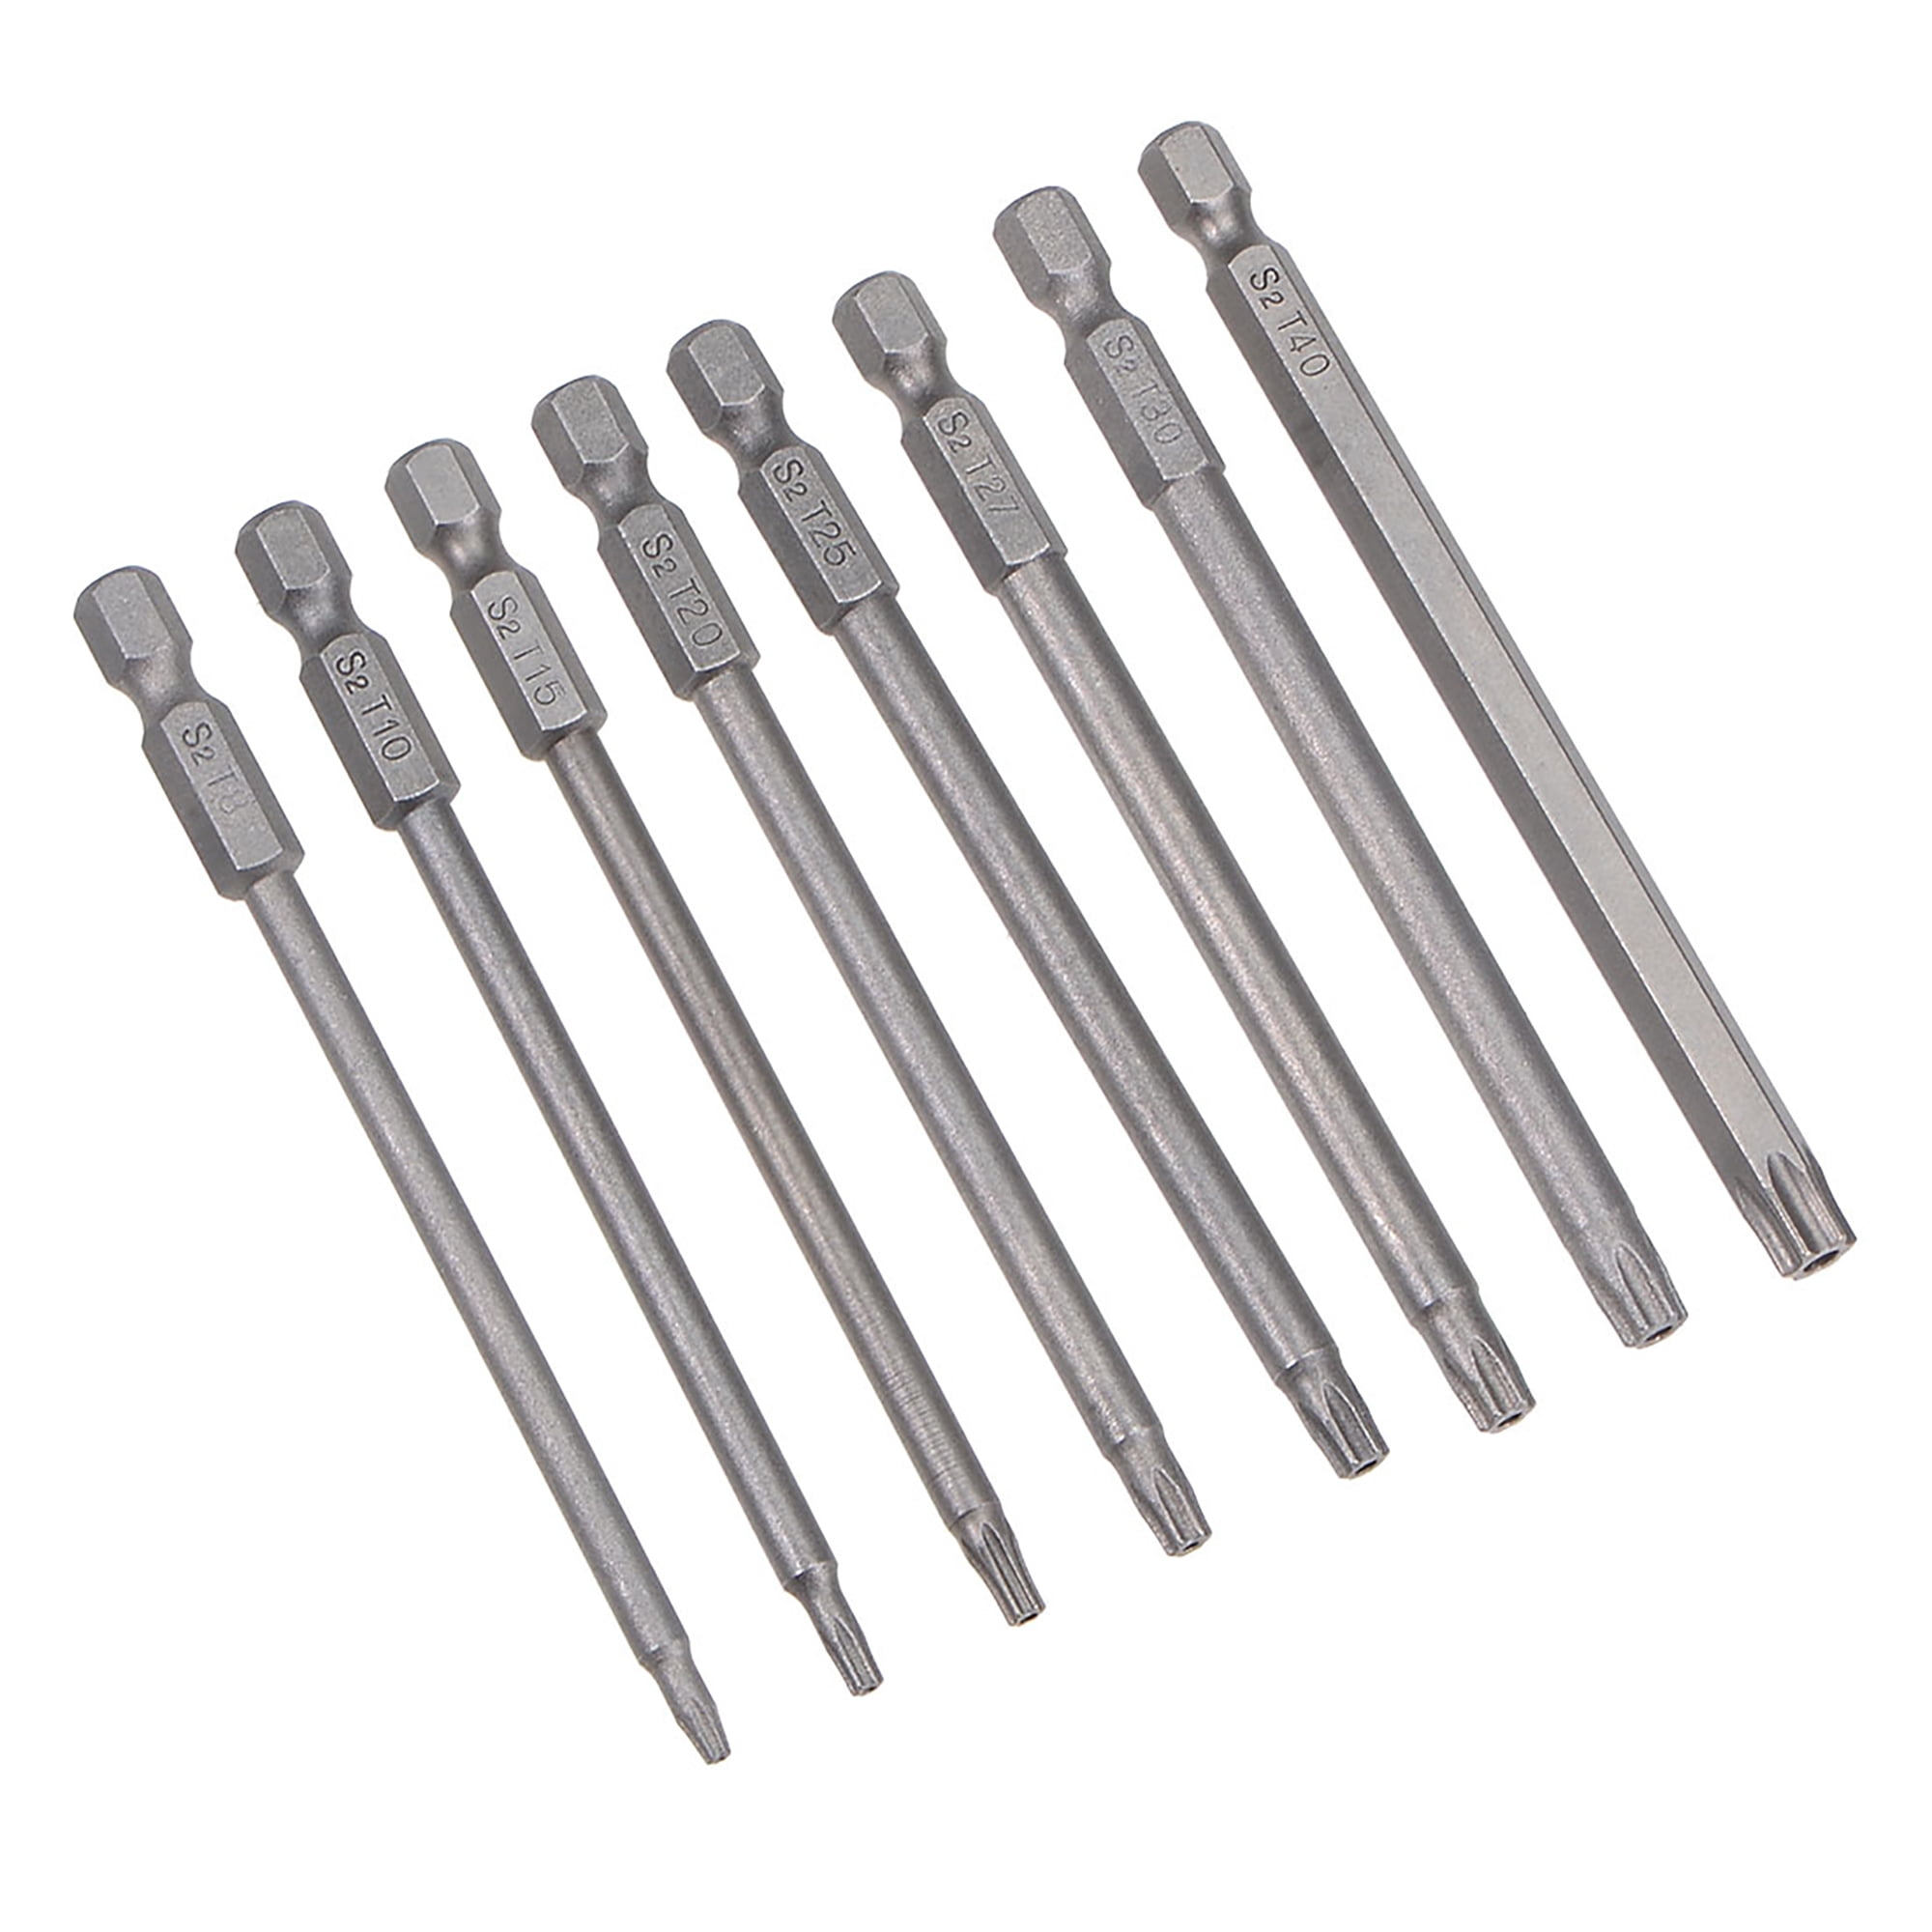 uxcell 1/4 Hex Shank T27 Magnetic 5 Point Star Security Screwdrivers Bits 10pcs 